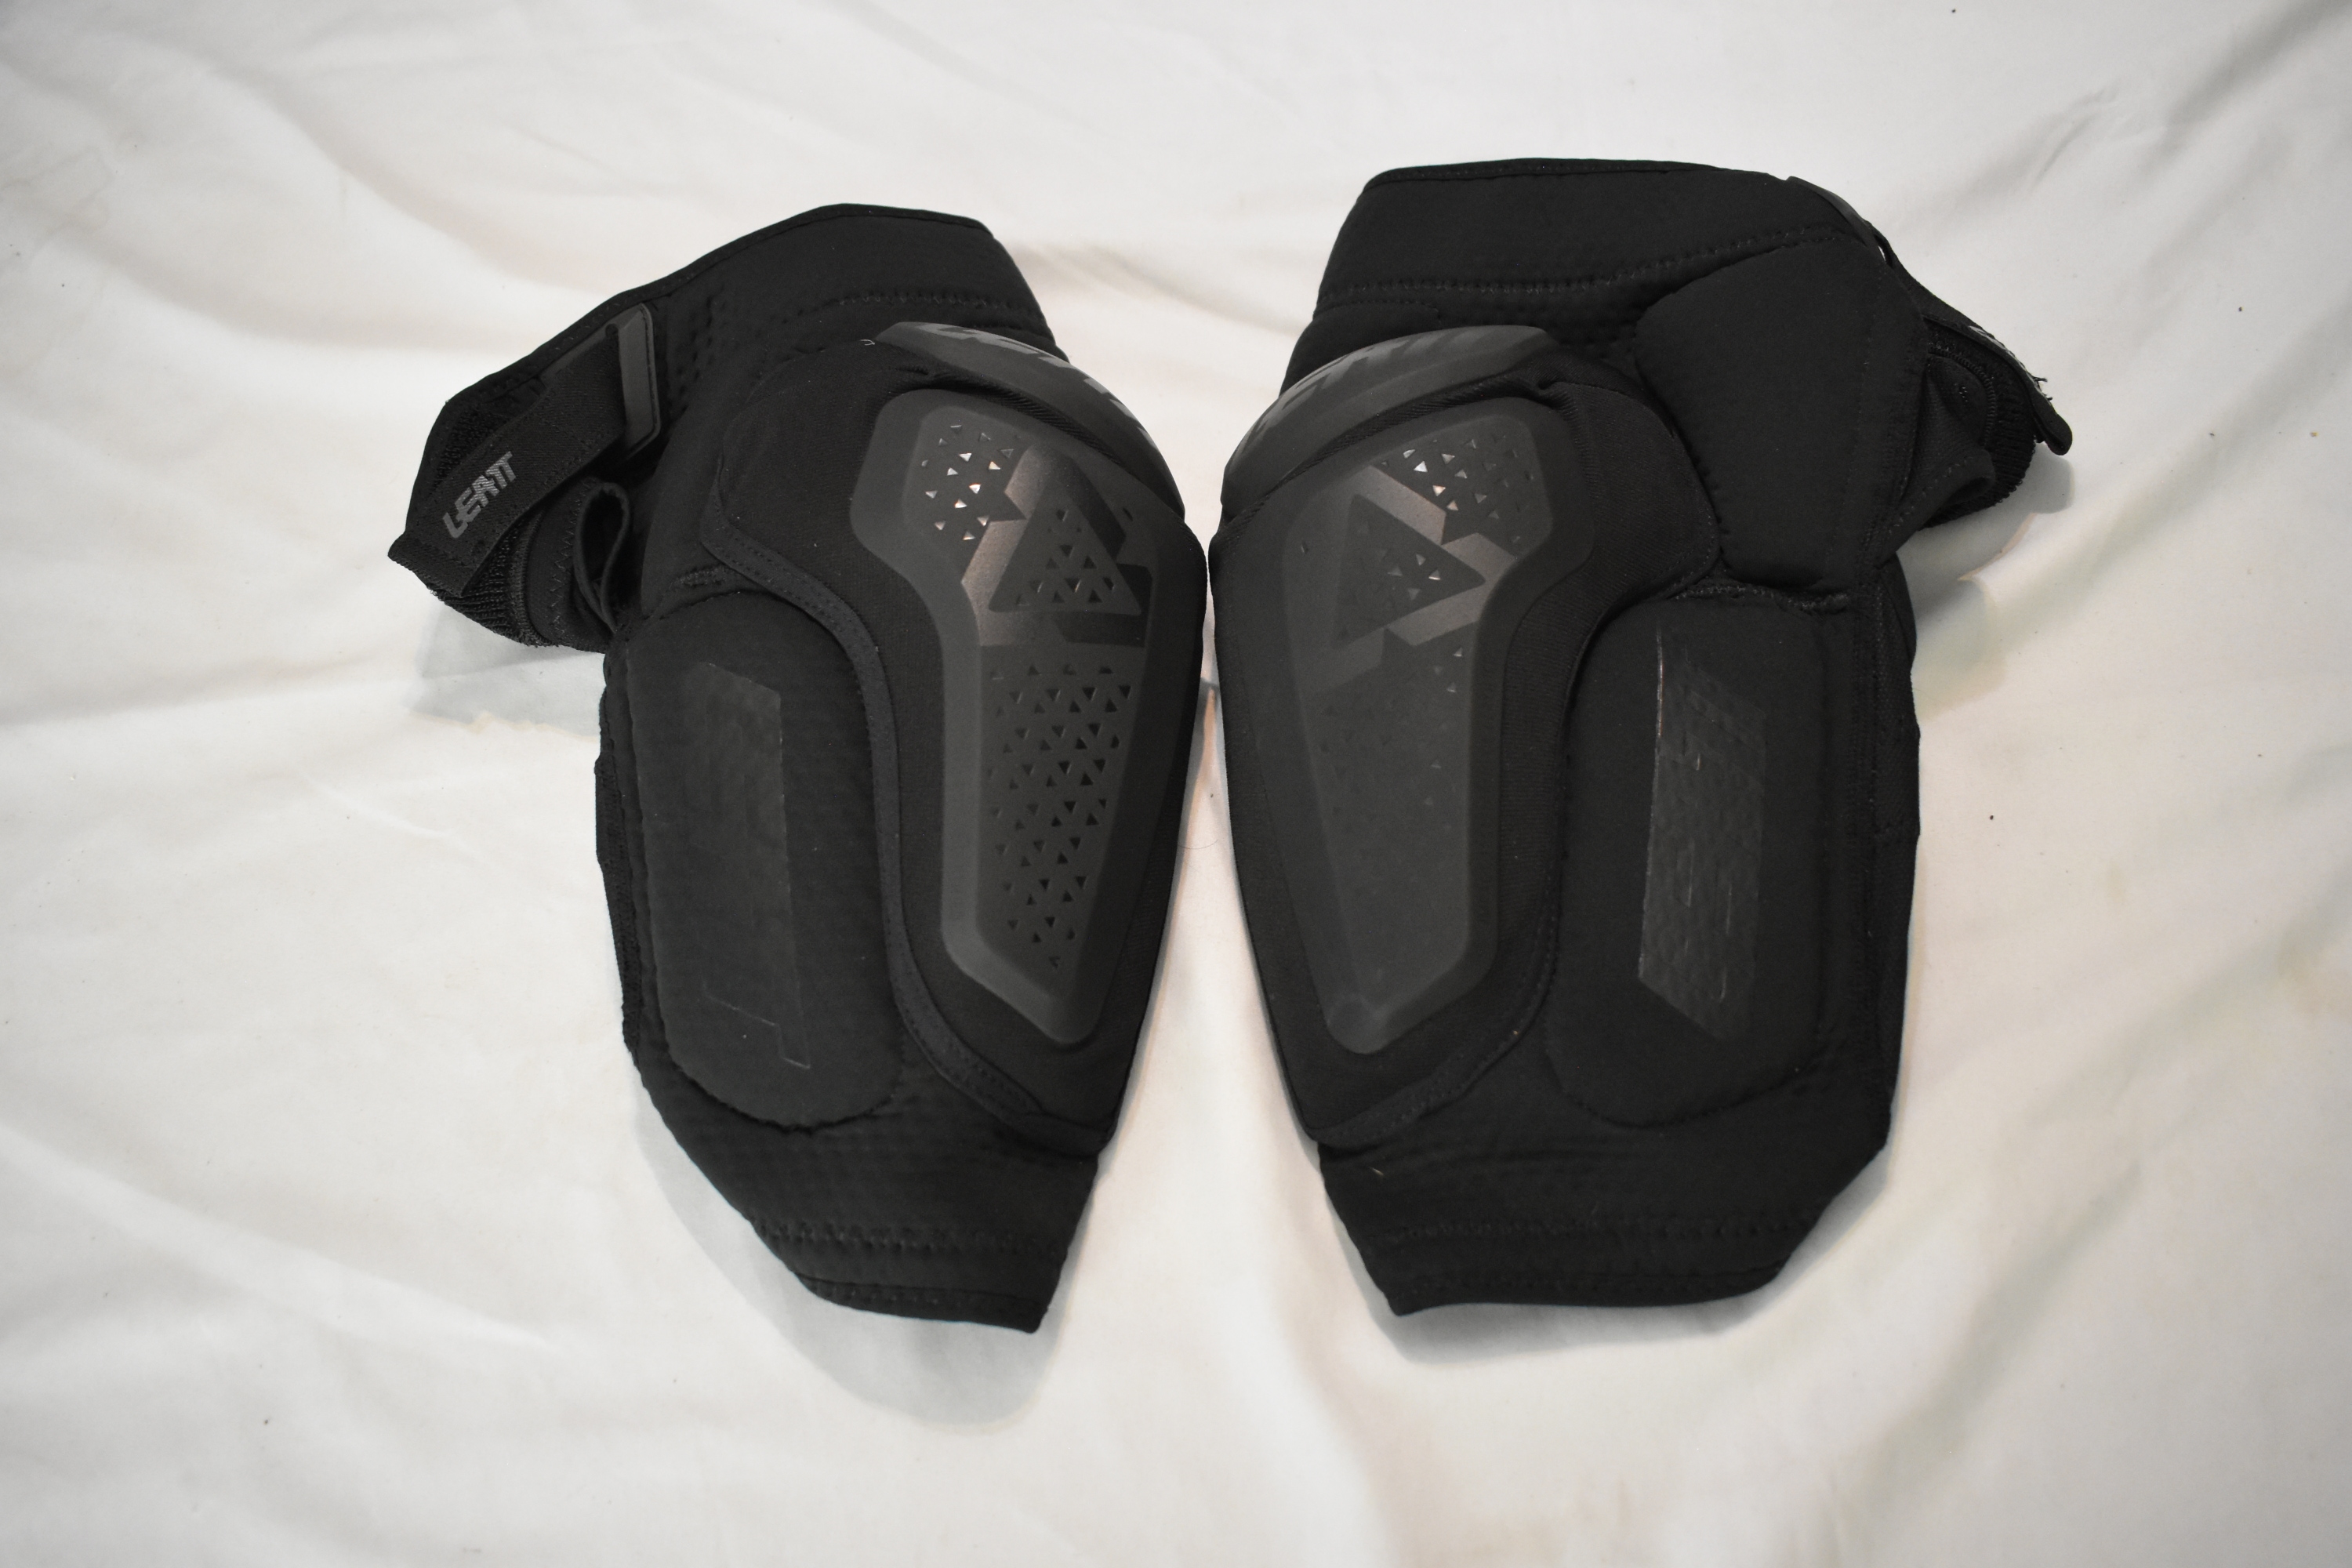 Leatt 3DF 6.0 Knee Guards, Black, Large - Great Condition!